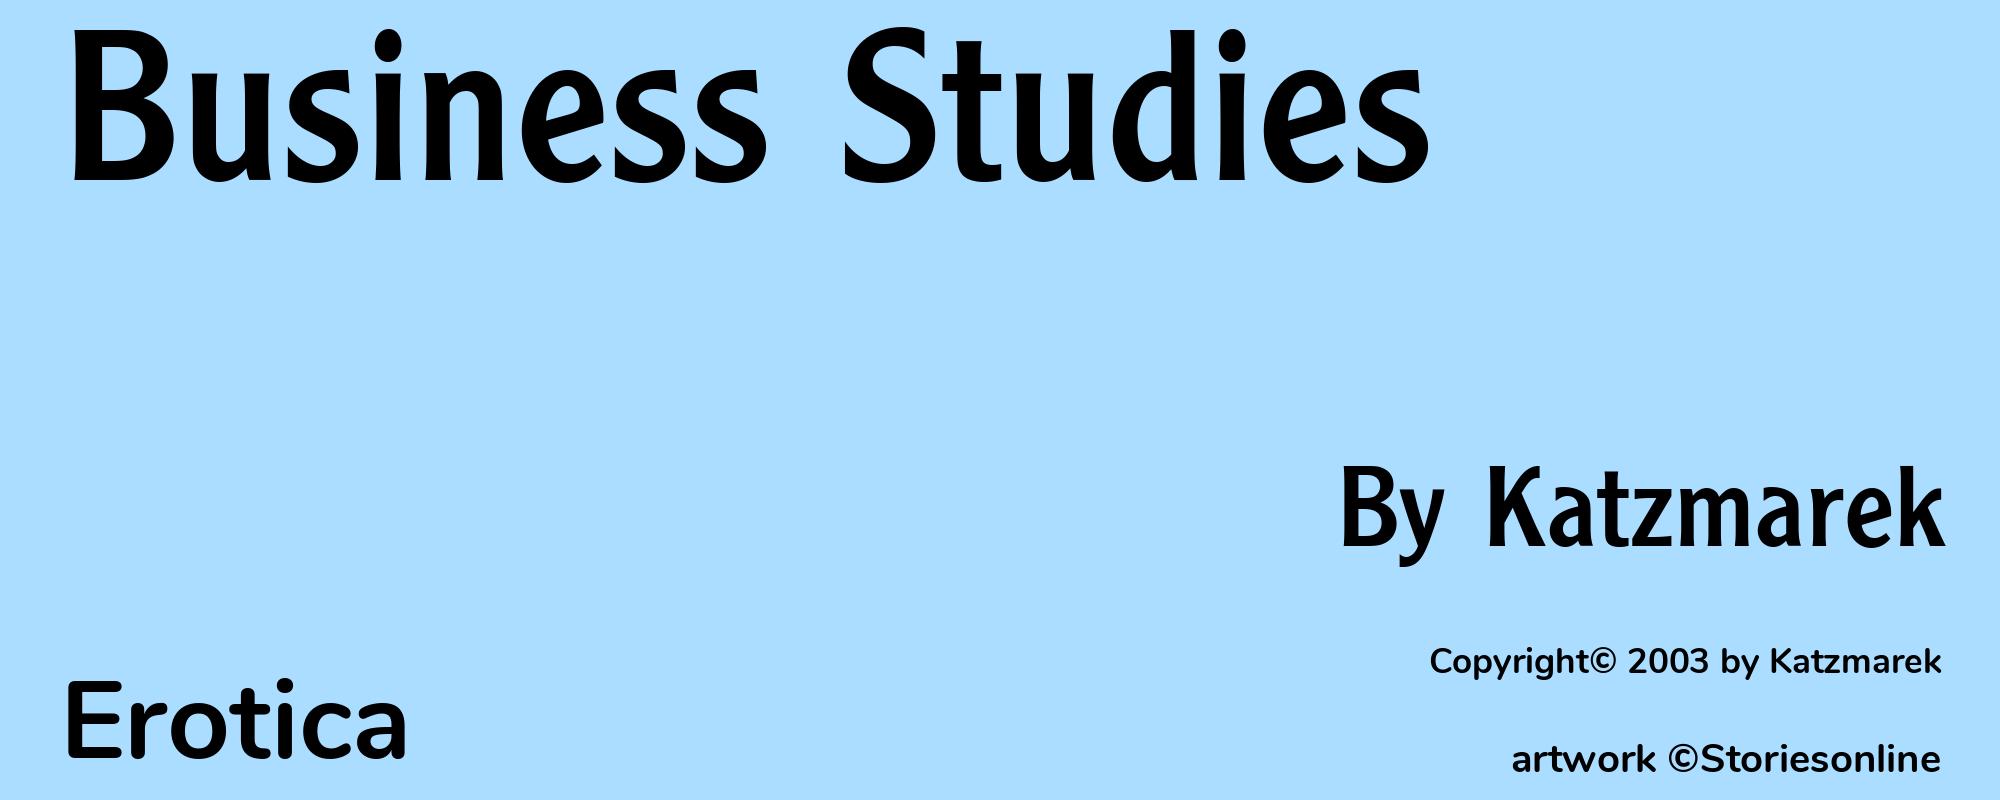 Business Studies - Cover